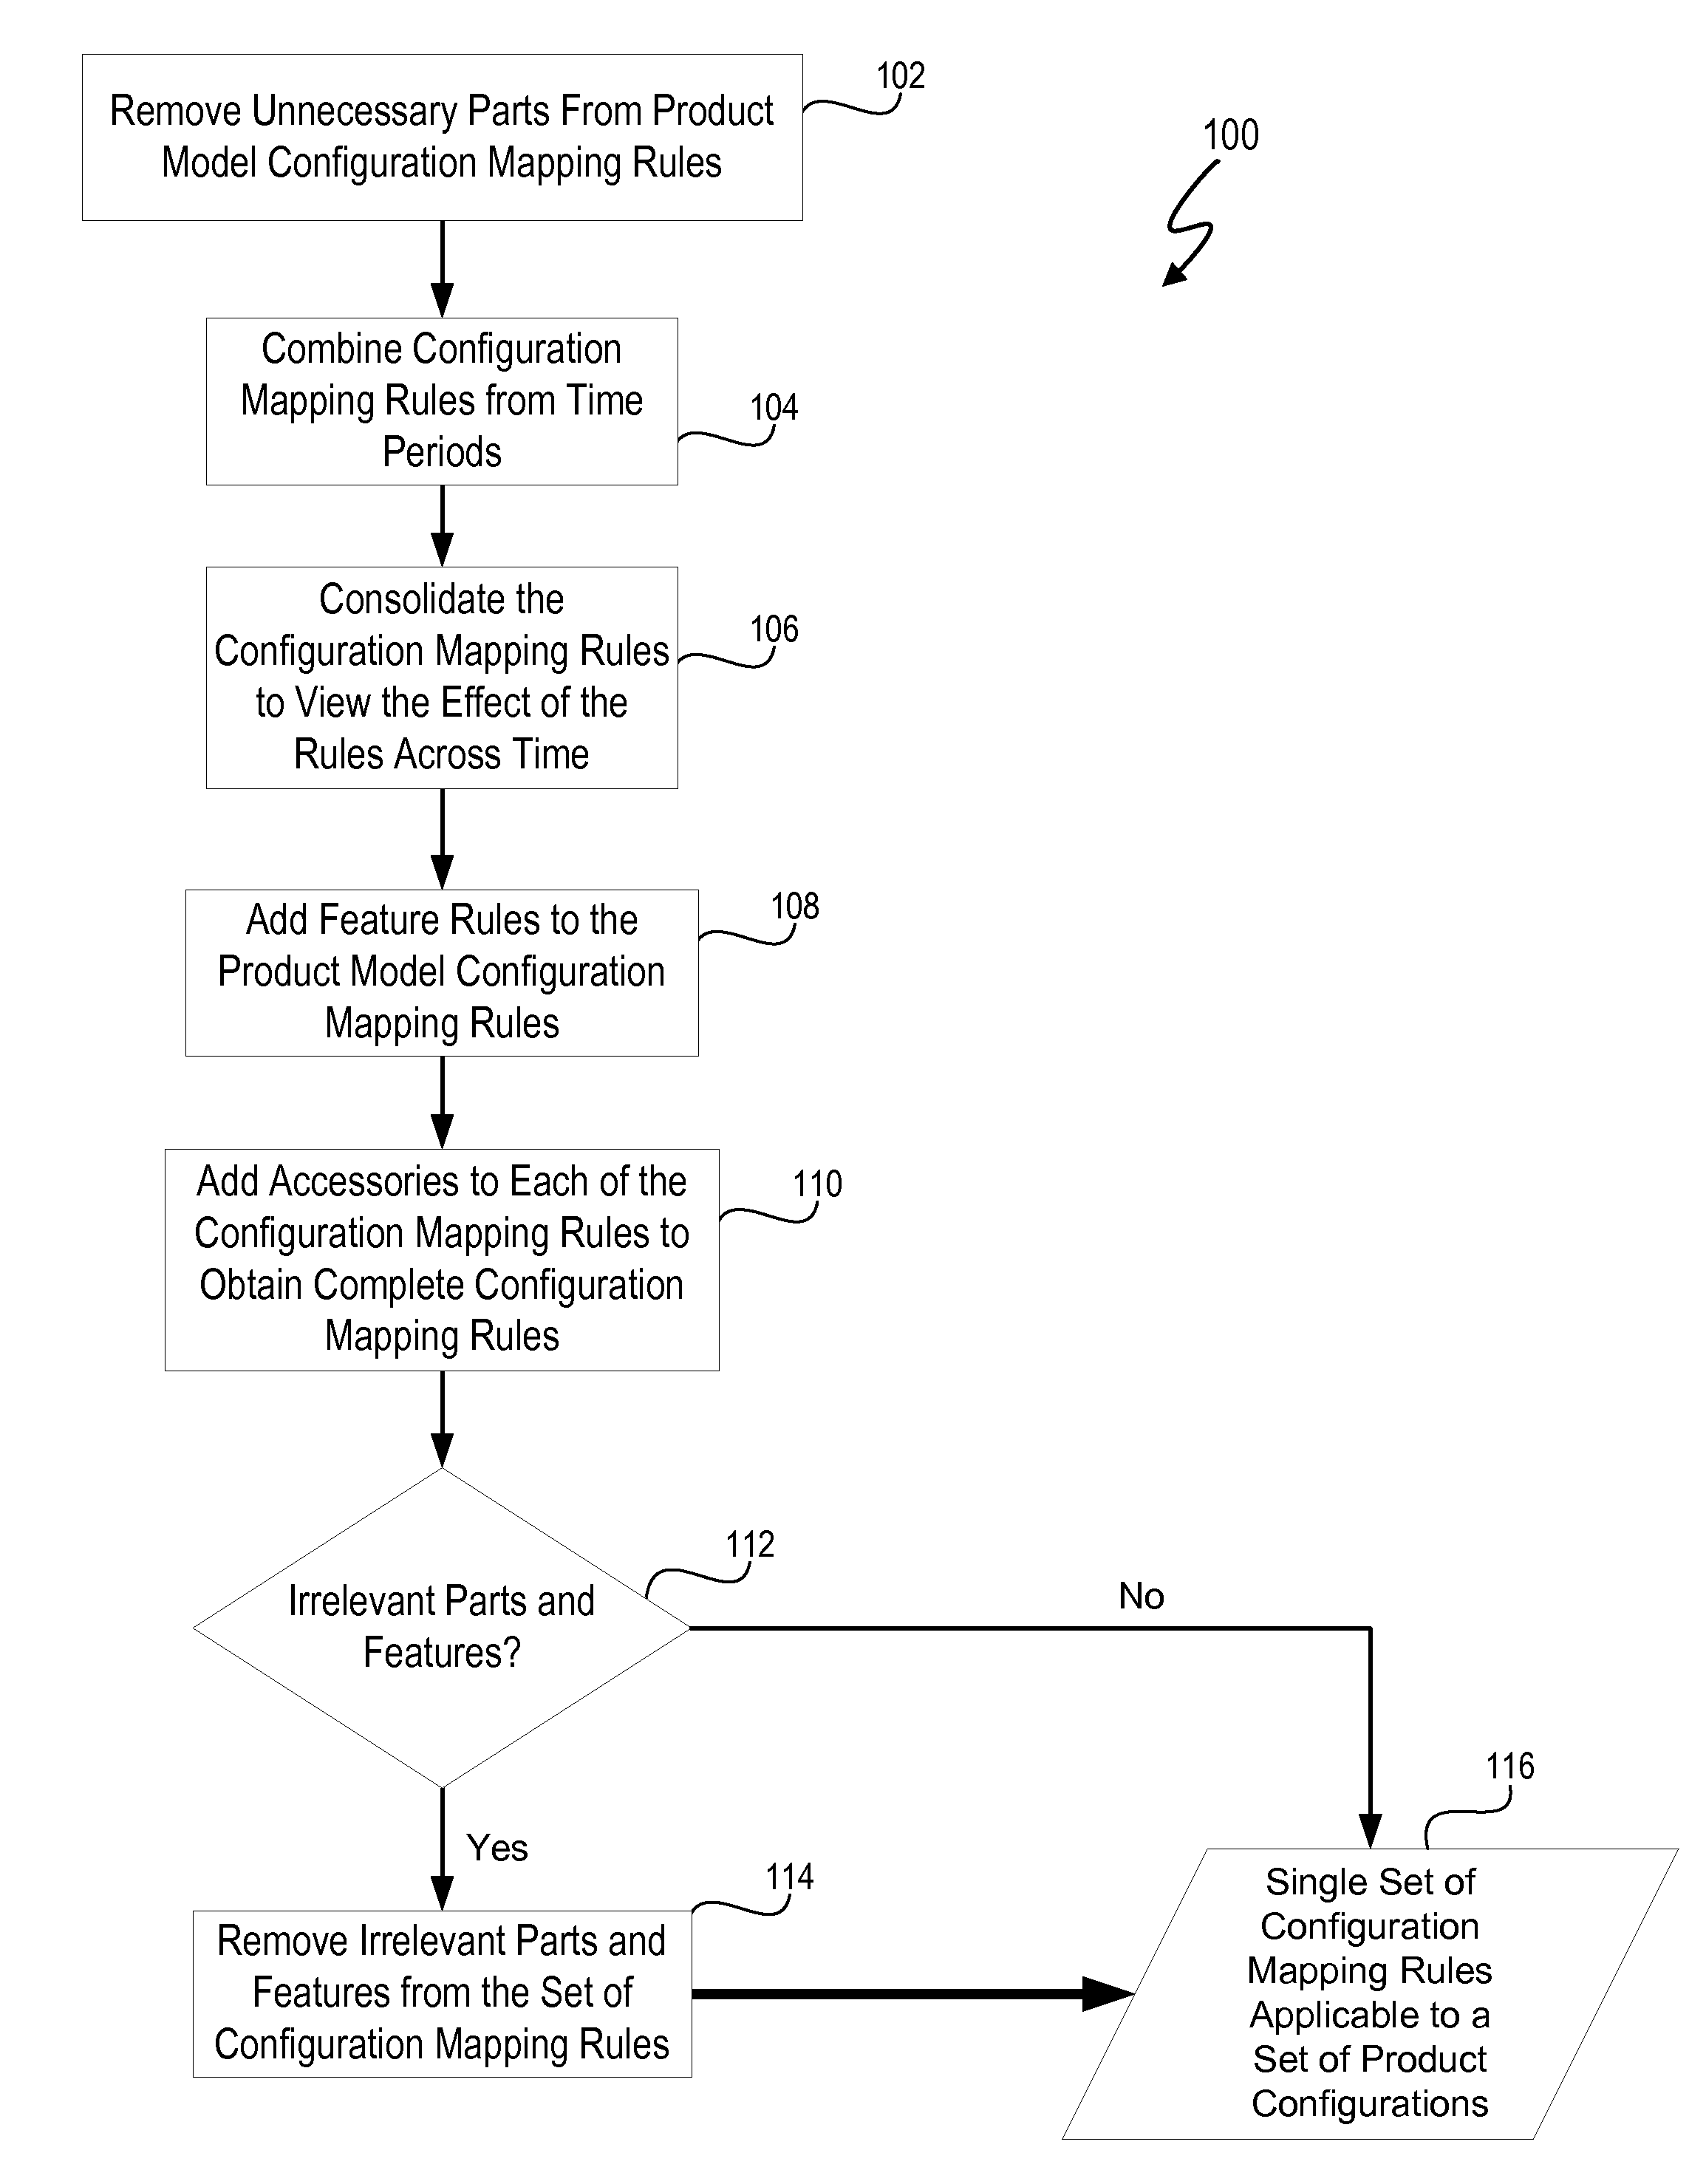 Configuration mapping using a multi-dimensional rule space and rule consolidation